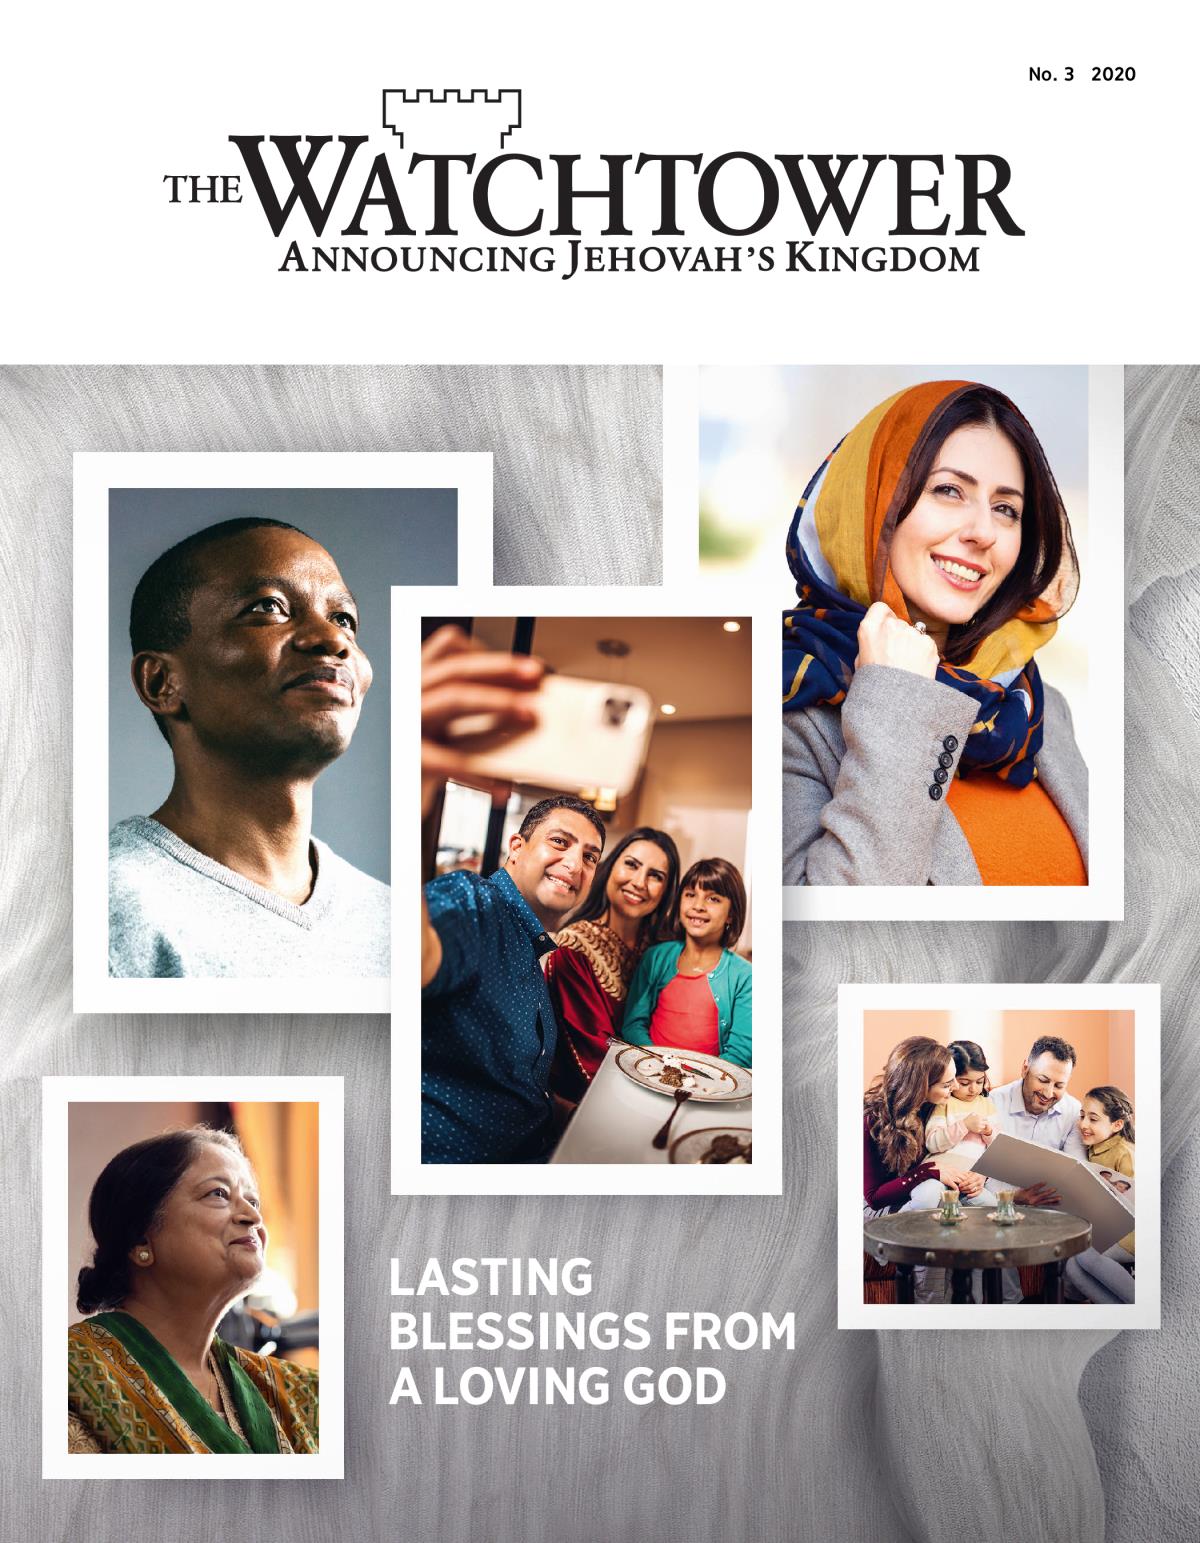 The Watchtower magazine, No. 3, 2020 | Lasting Blessings From a Loving God.